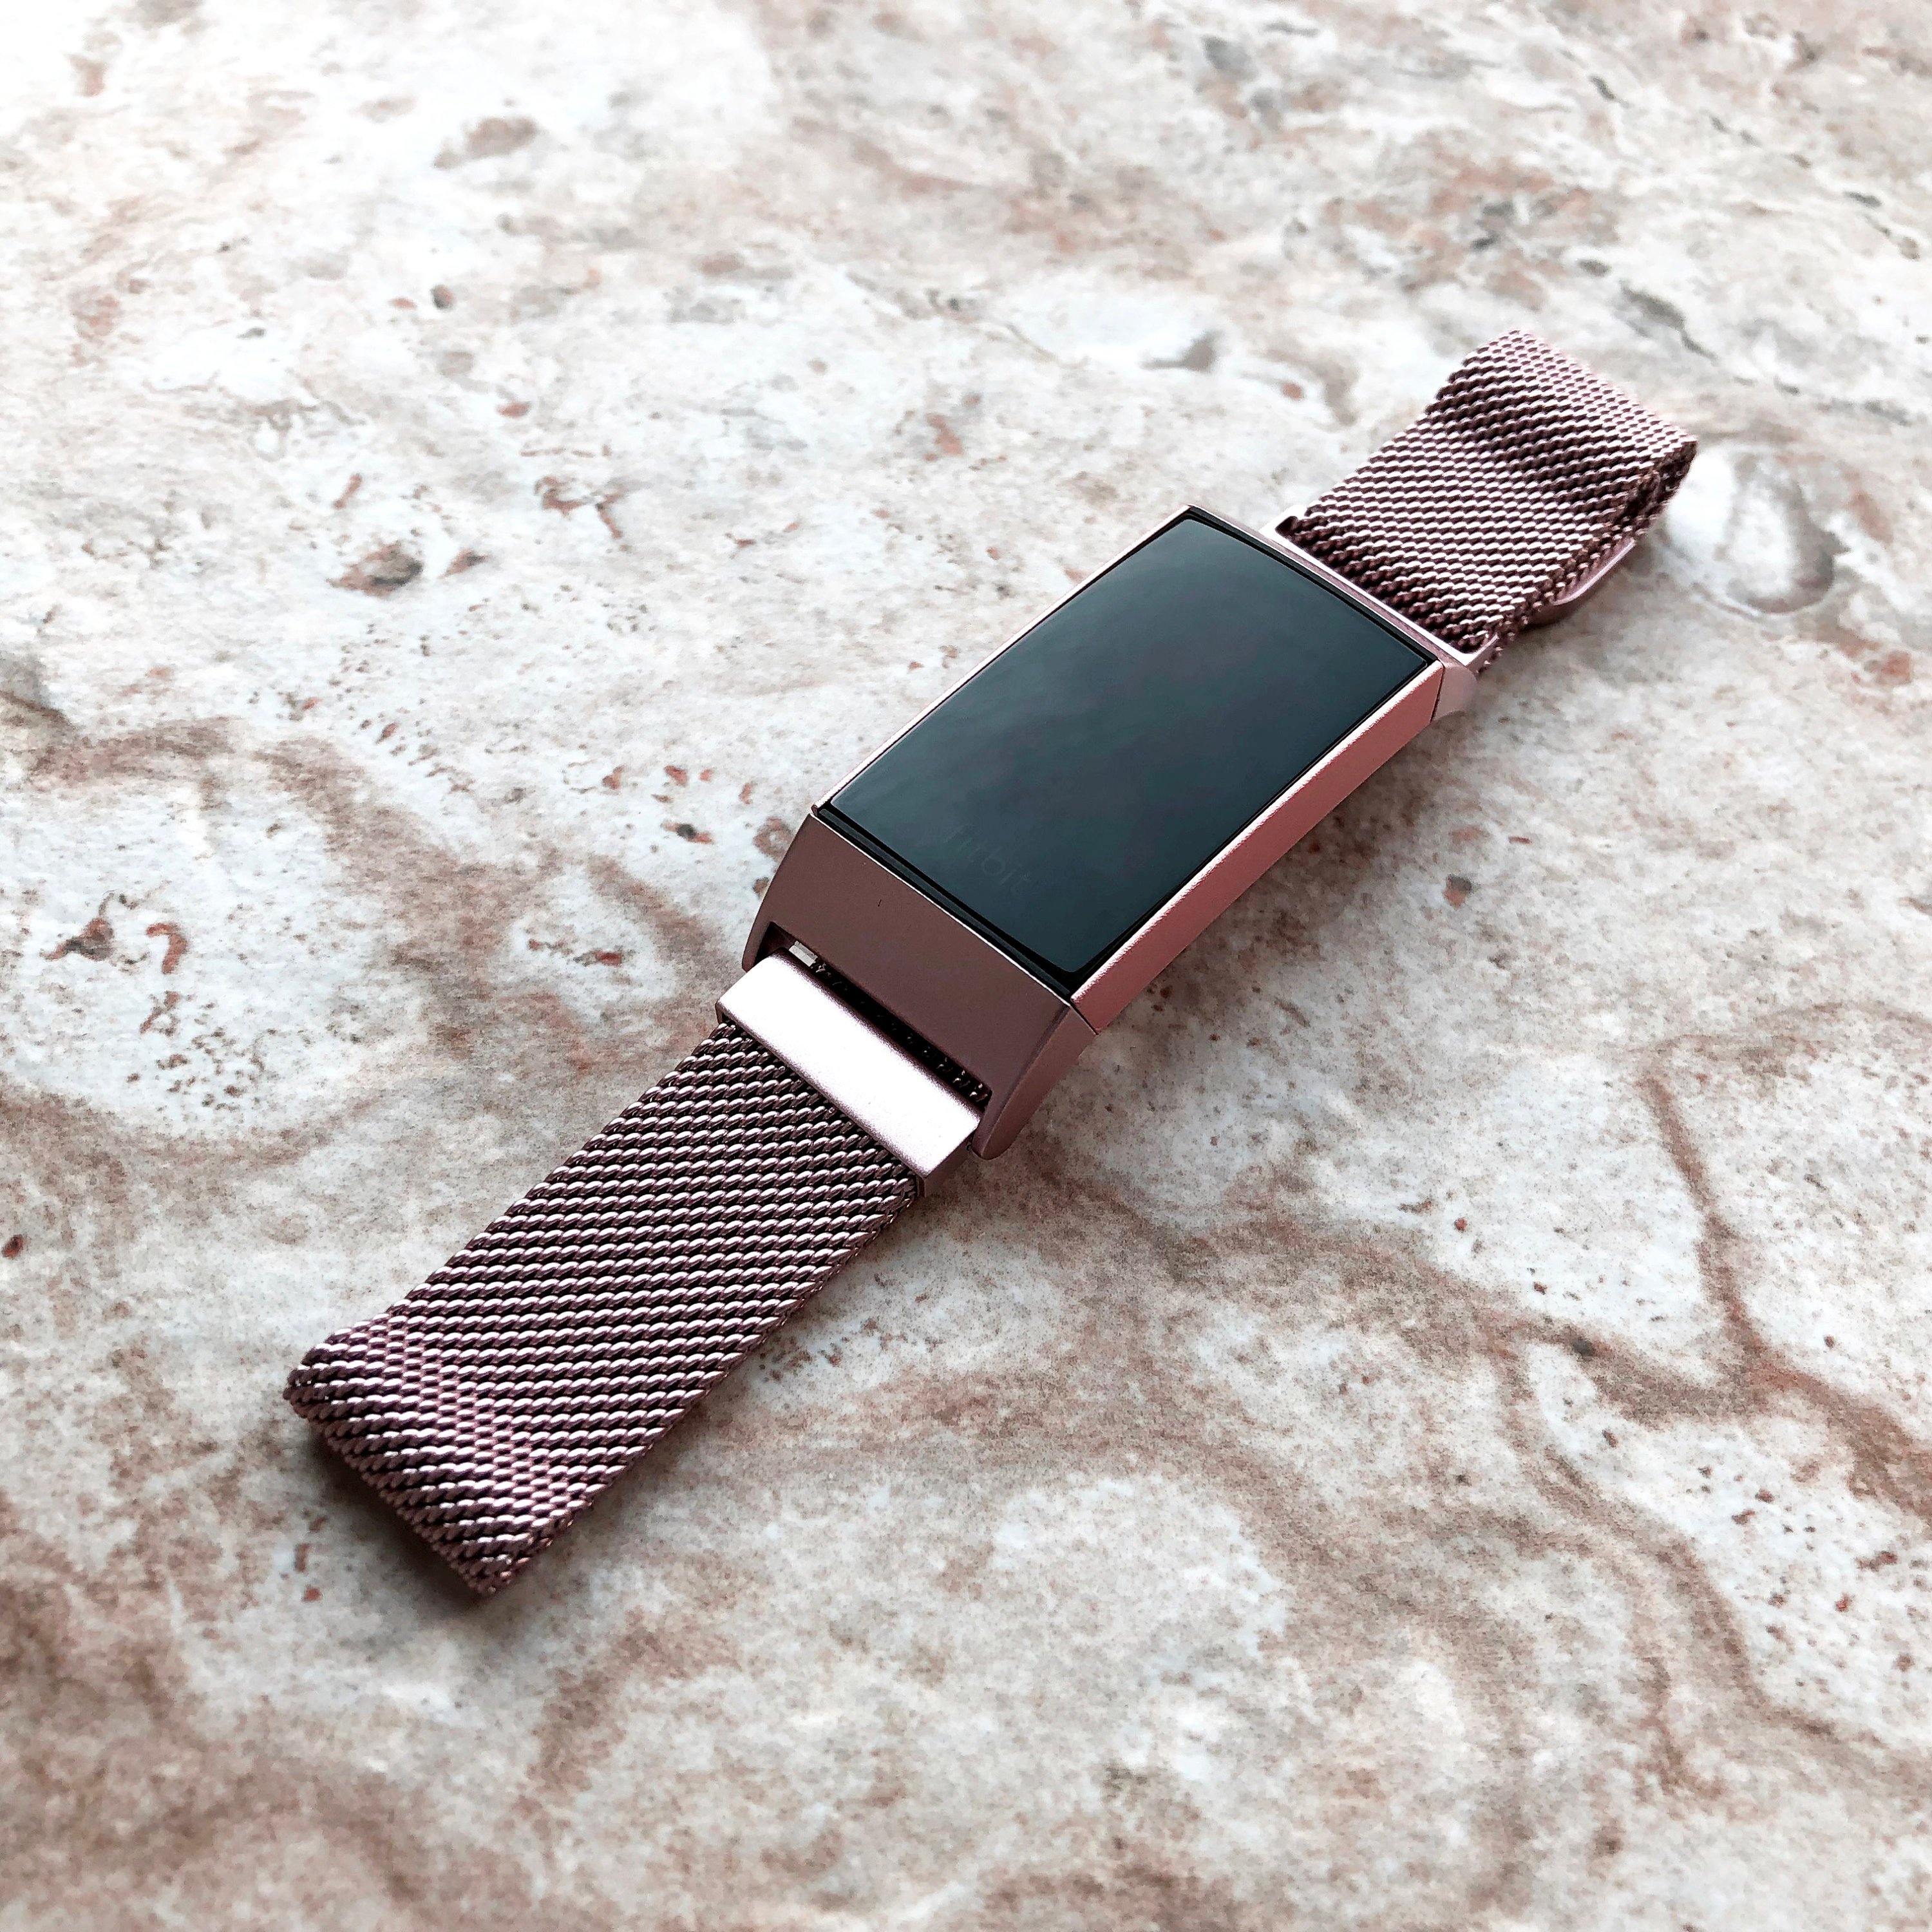 fitbit charge 3 straps rose gold